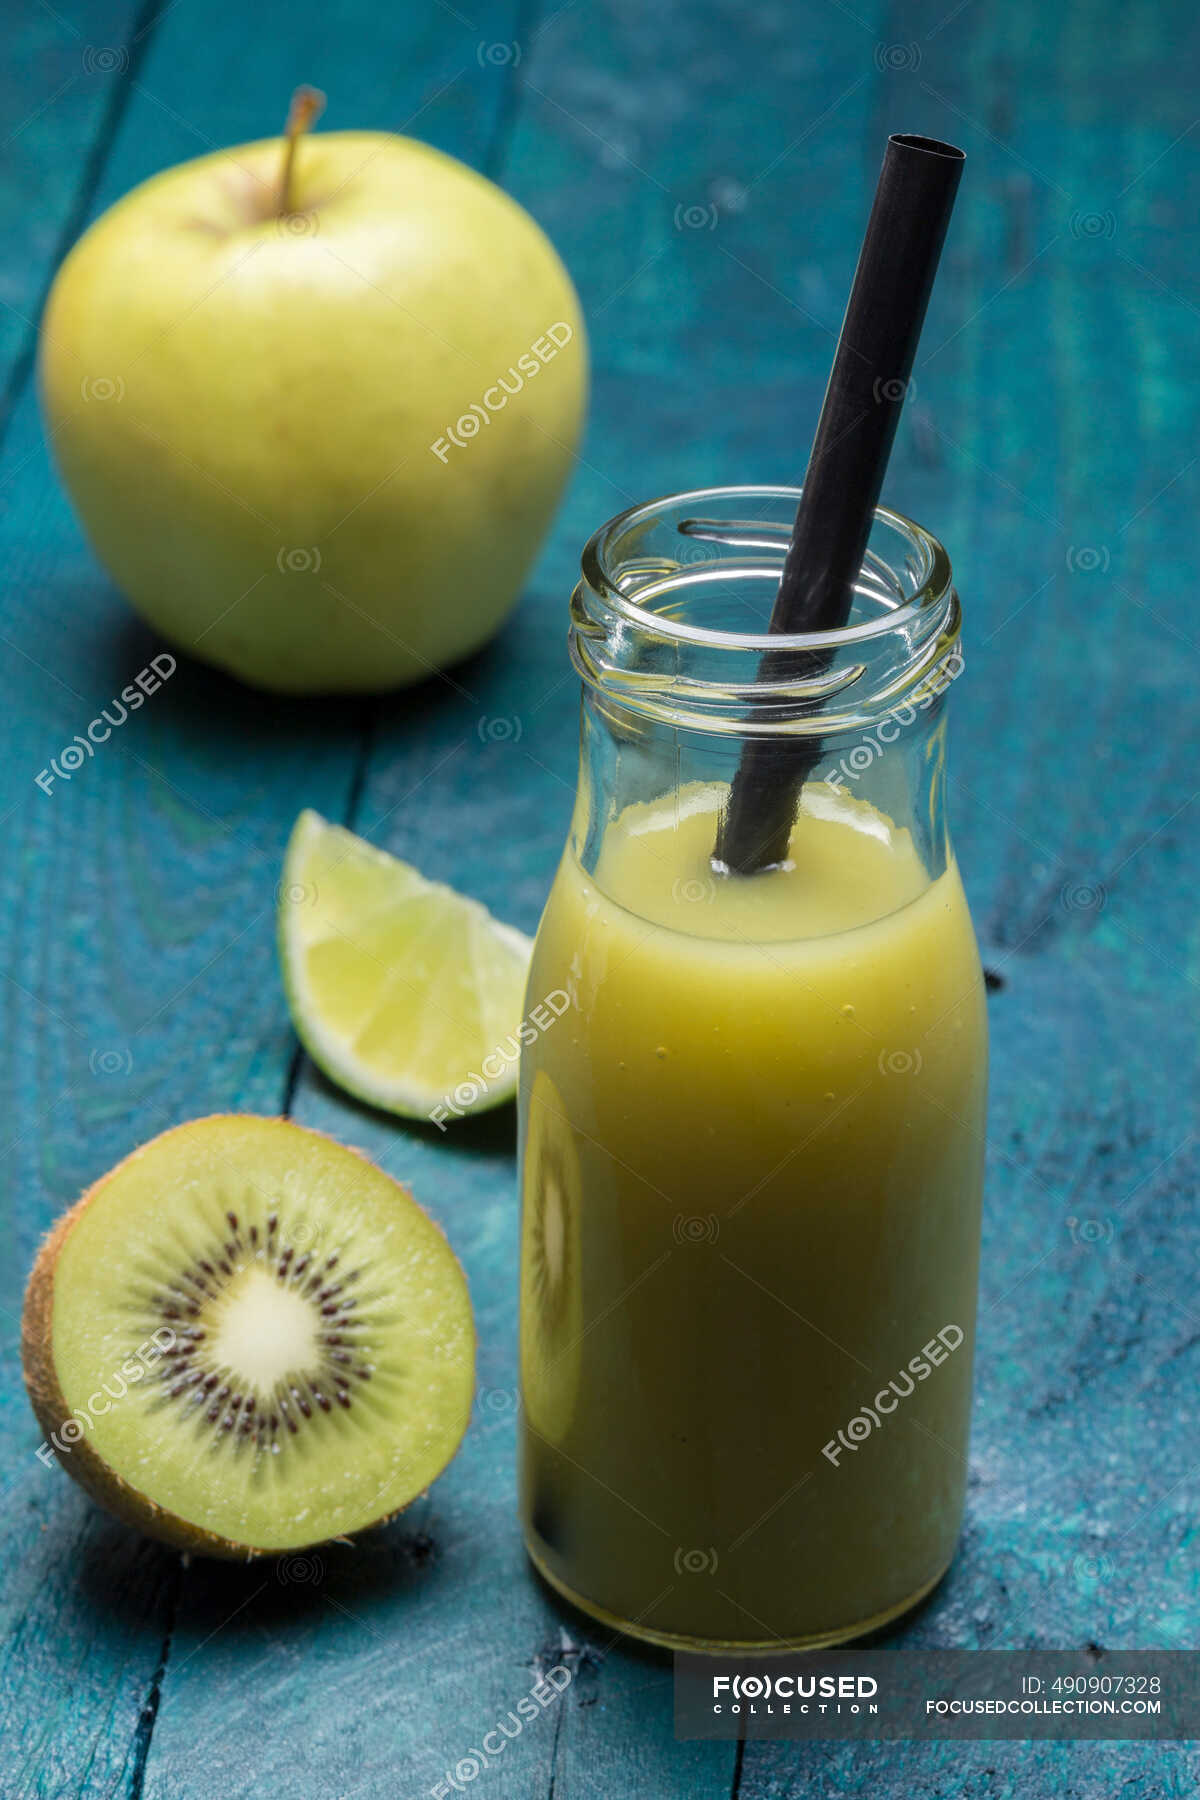 A kiwi and apple smoothie with lime in a bottle with a straw — kiwis,  colours - Stock Photo | #490907328